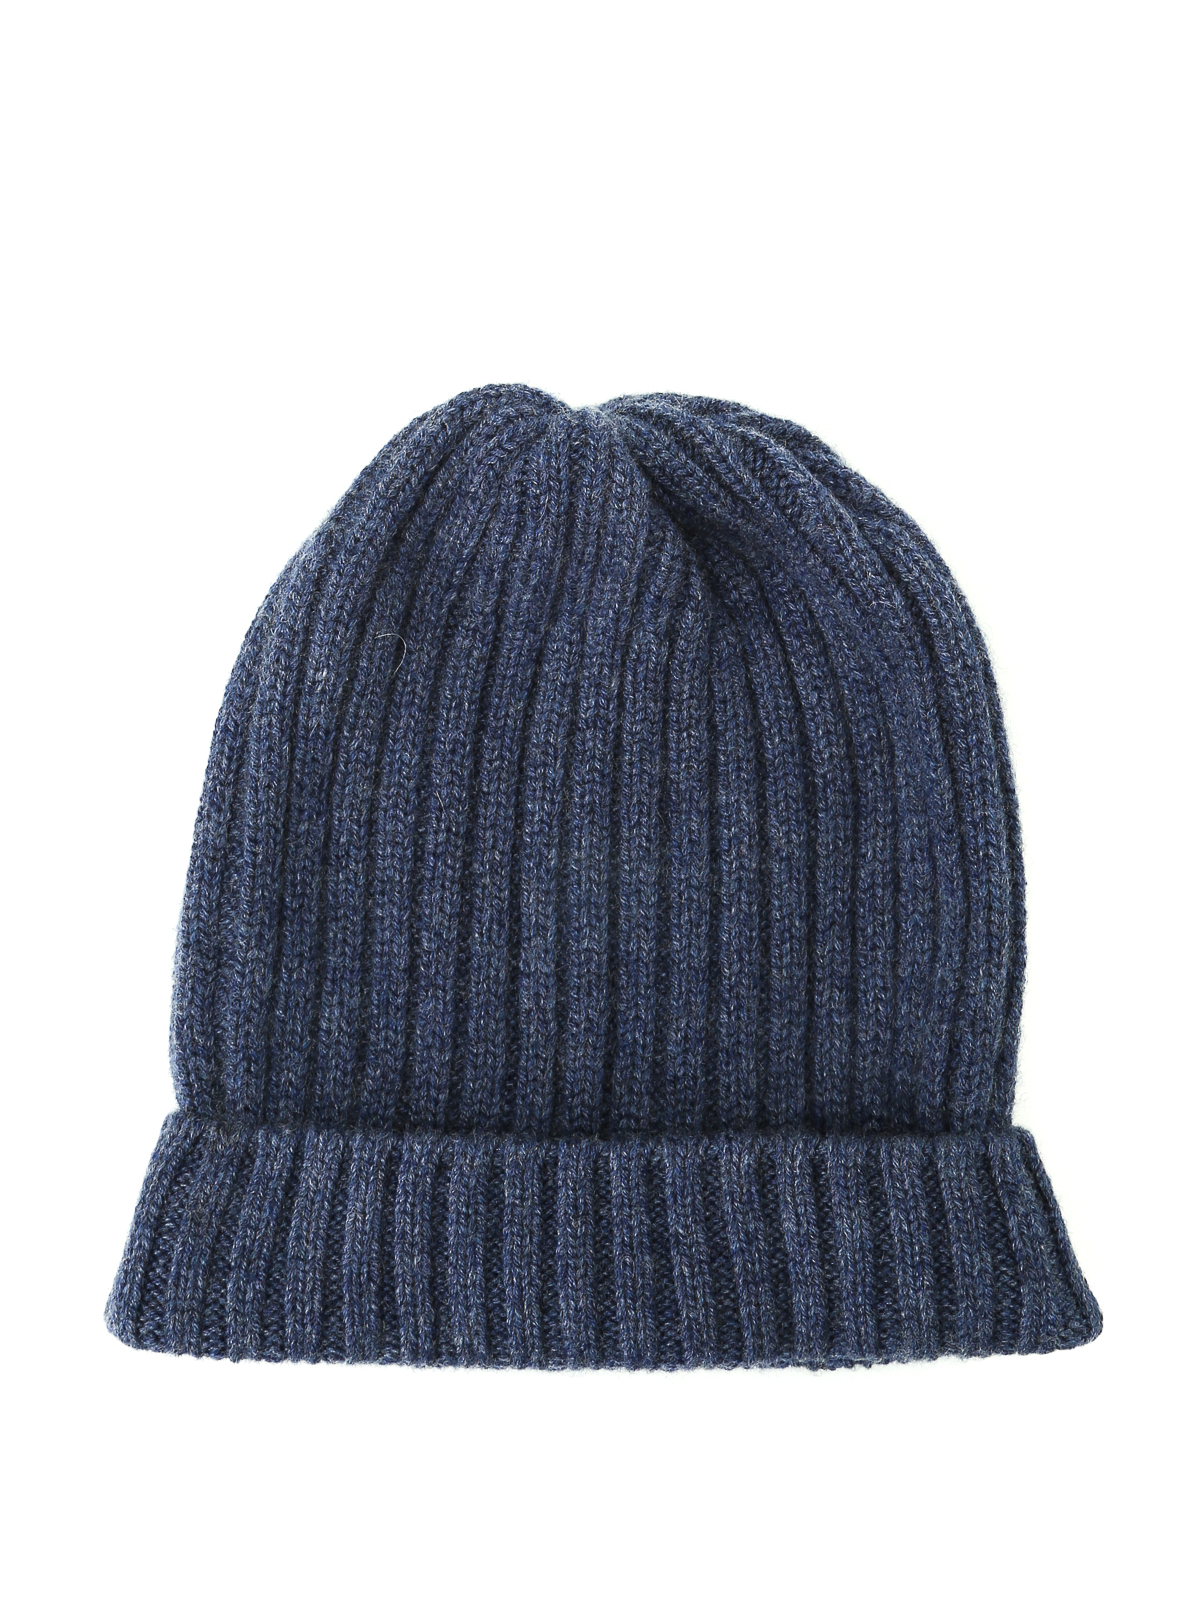 Beanies Fedeli - Light blue ribbed cashmere beanie - F54CWEJEANS